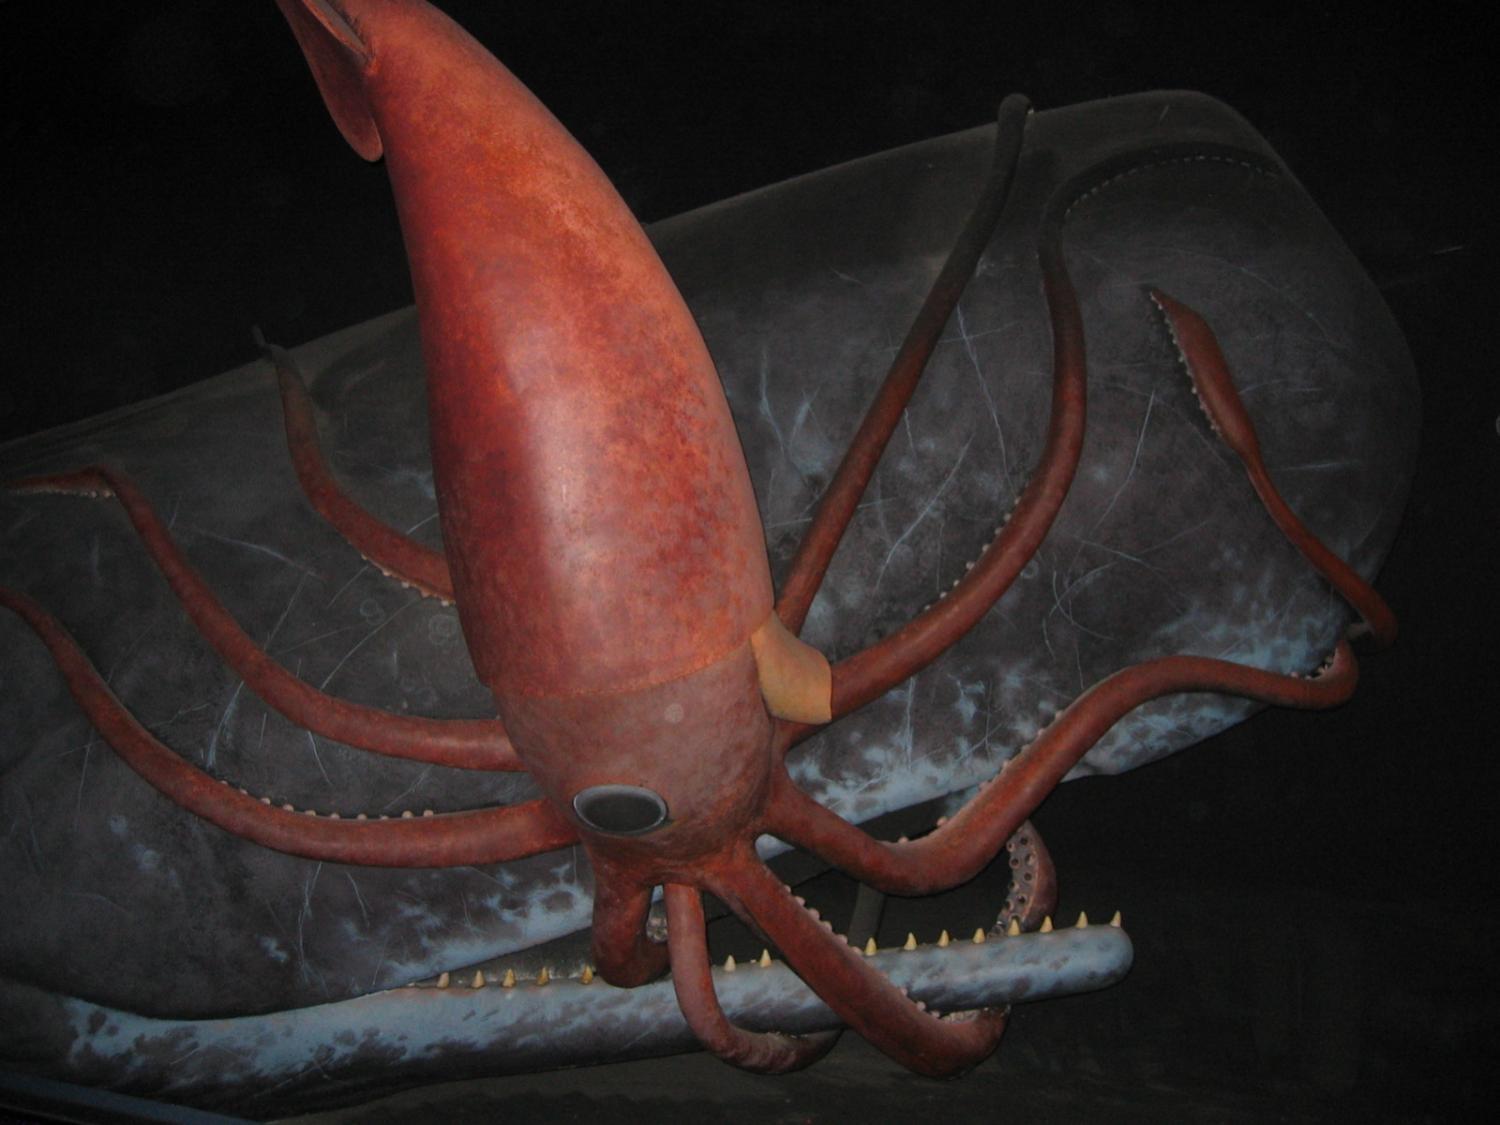 Discovery sperm whale squid